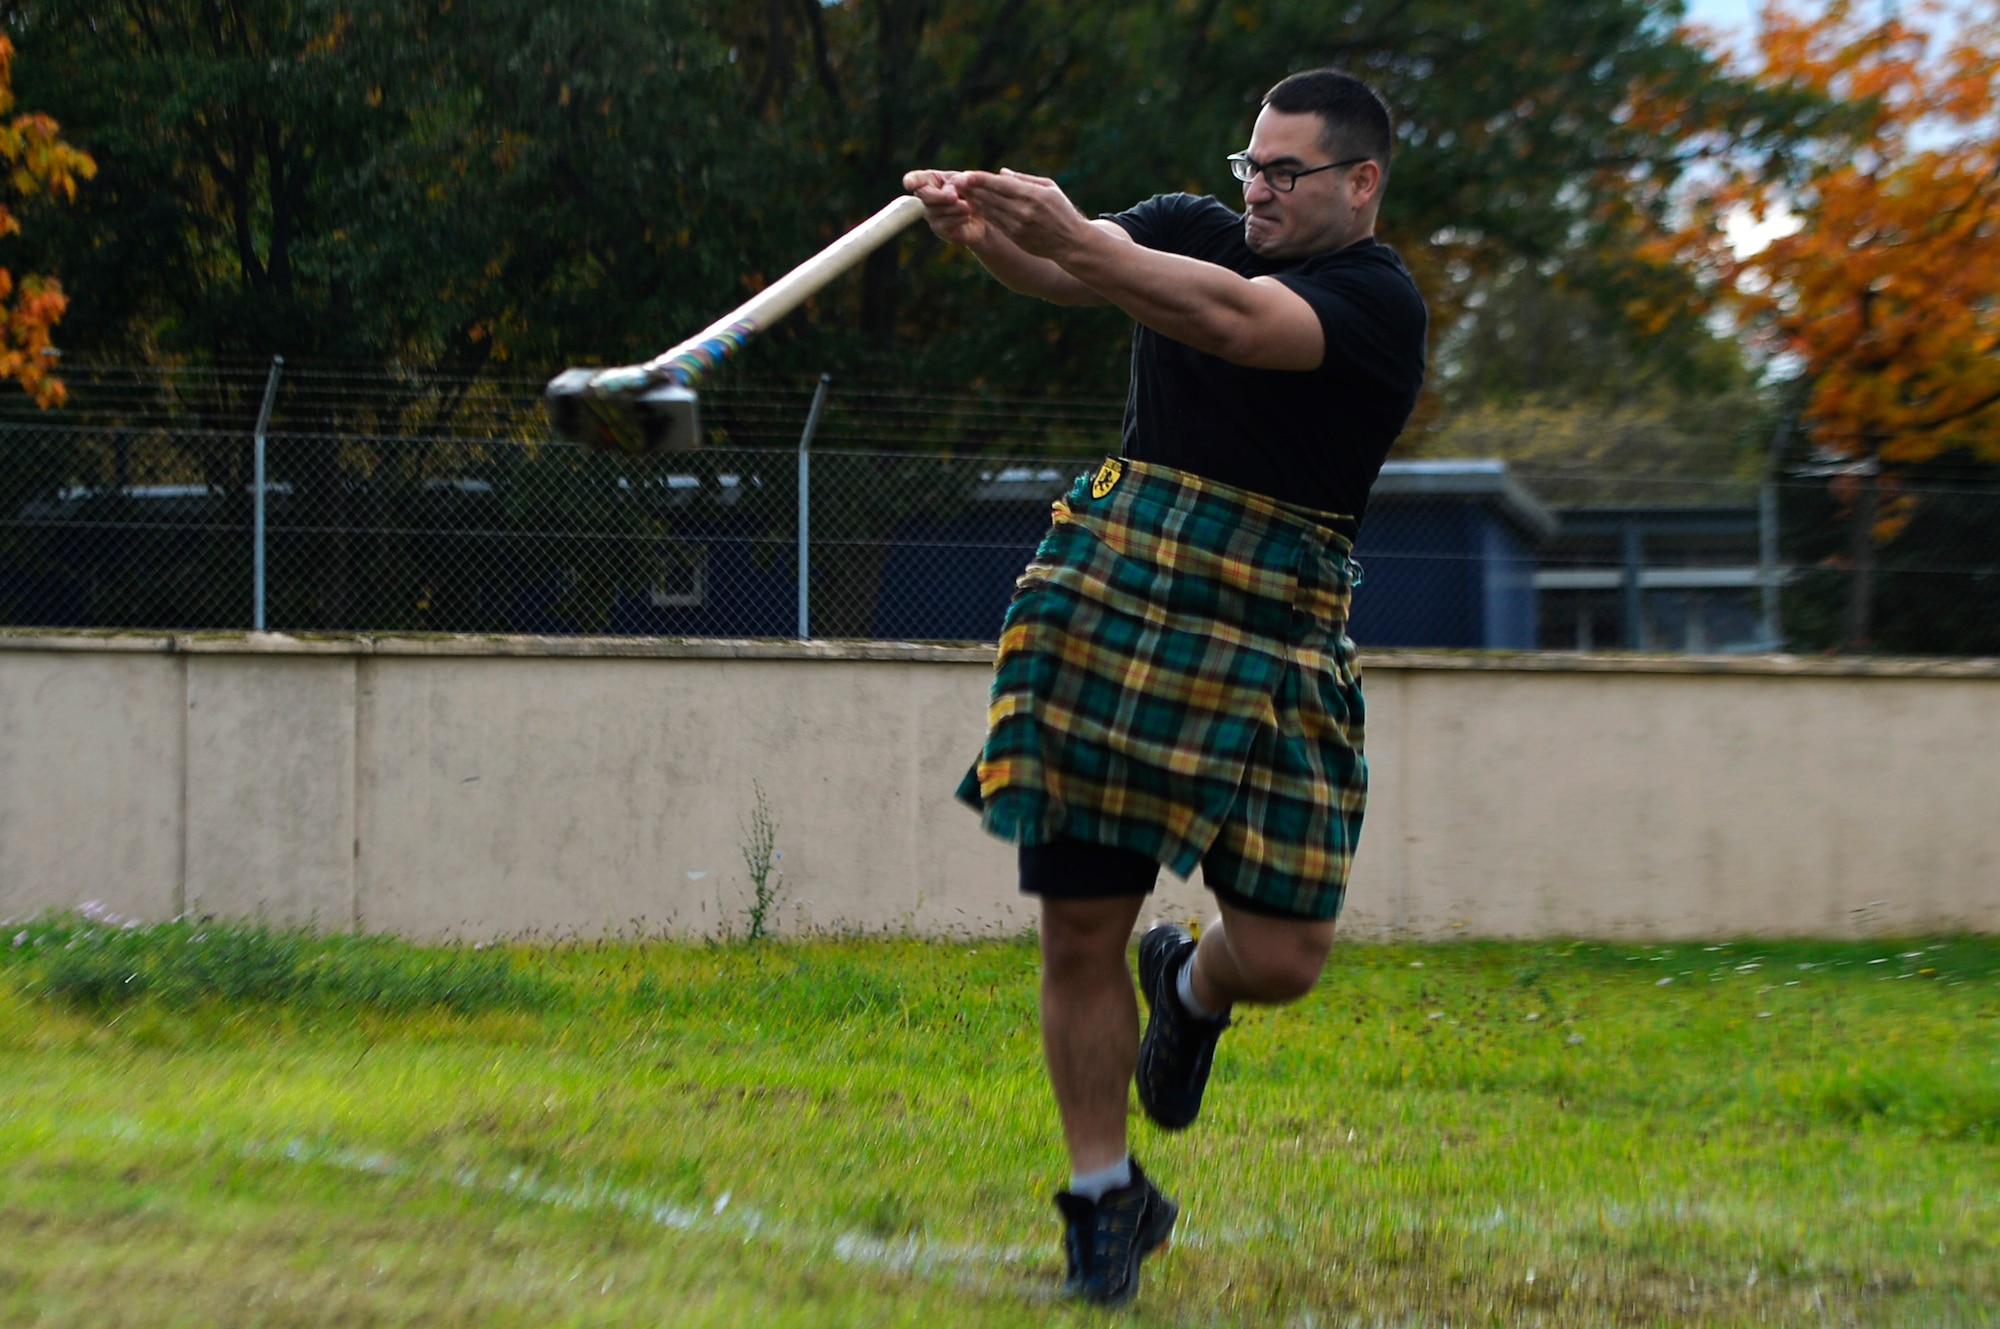 U.S. Air Force Tech. Sgt. Jeremy Goldman, 450th Intelligence Squadron noncommissioned officer in charge of training, participates in a hammer throw event during the 693rd Intelligence, Surveillance, and Reconnaissance Group’s Highland Games at Wiesbaden, Germany, Oct. 11, 2017. The games were inspired by the annual cultural and athletic events originating in Scotland. (U.S. Air Force photo by Airman 1st Class Joshua Magbanua)